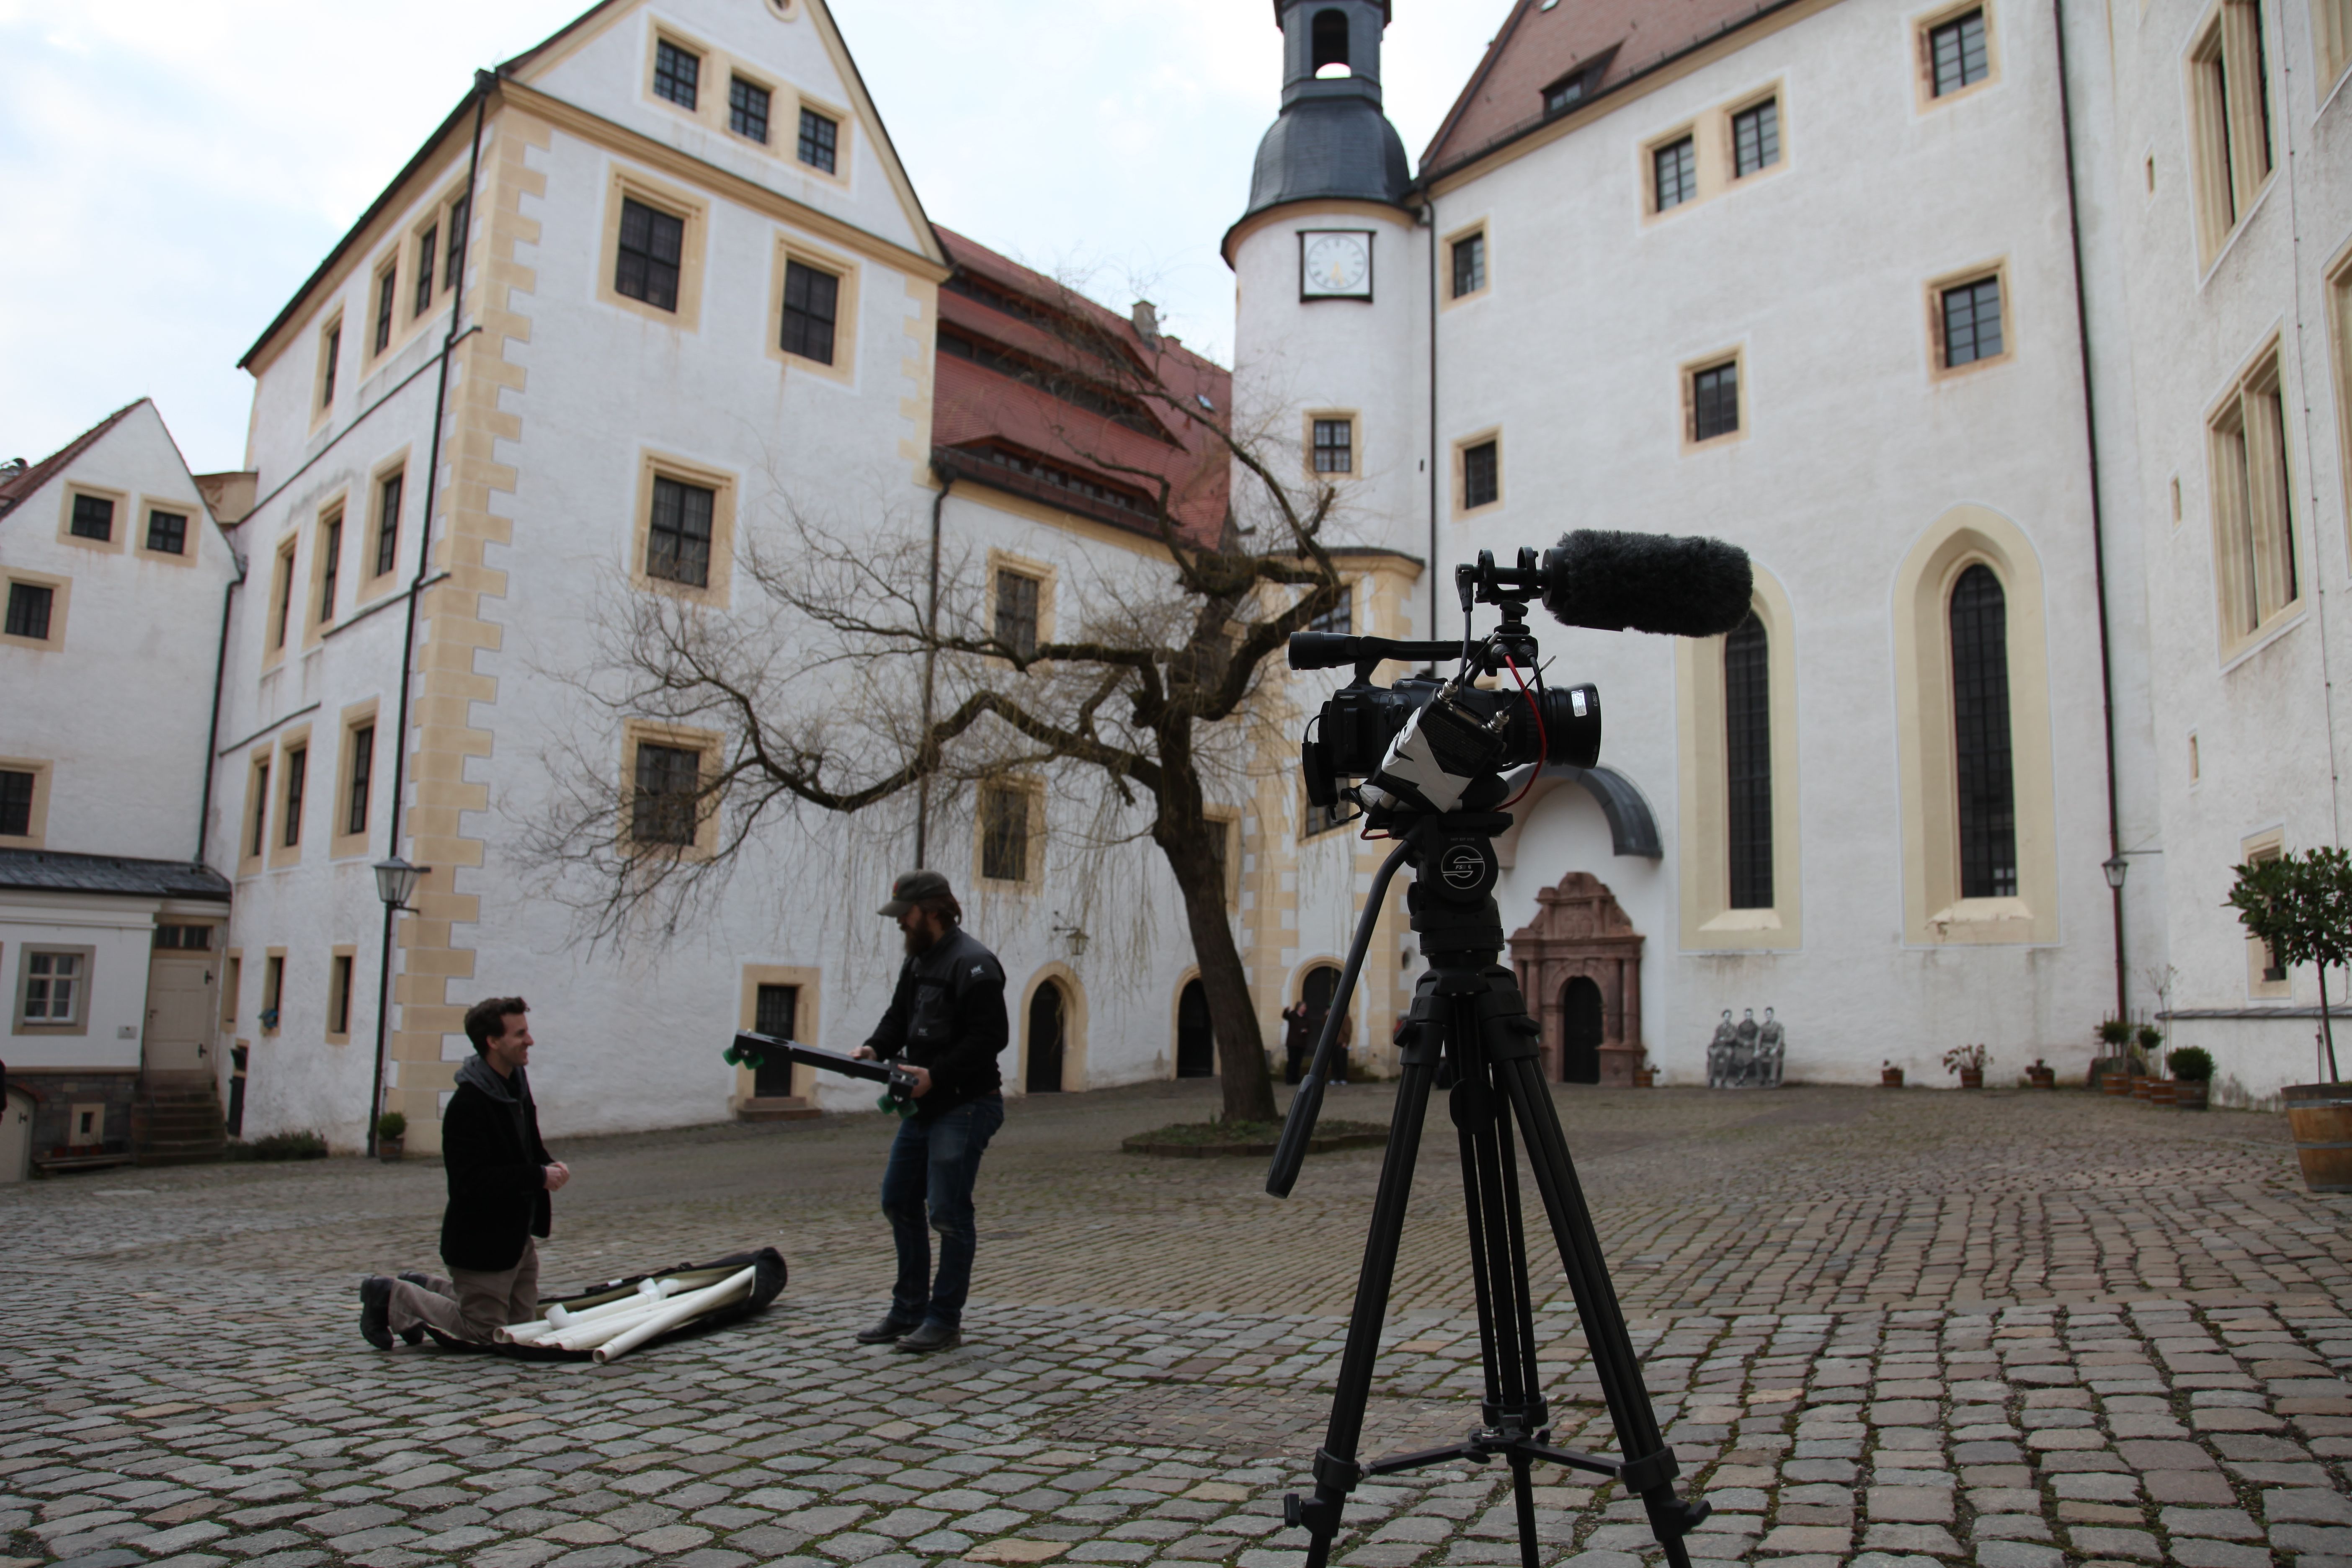 With cinematographer Jeremy Mack at Colditz Castle in Germany while shooting the documentary 